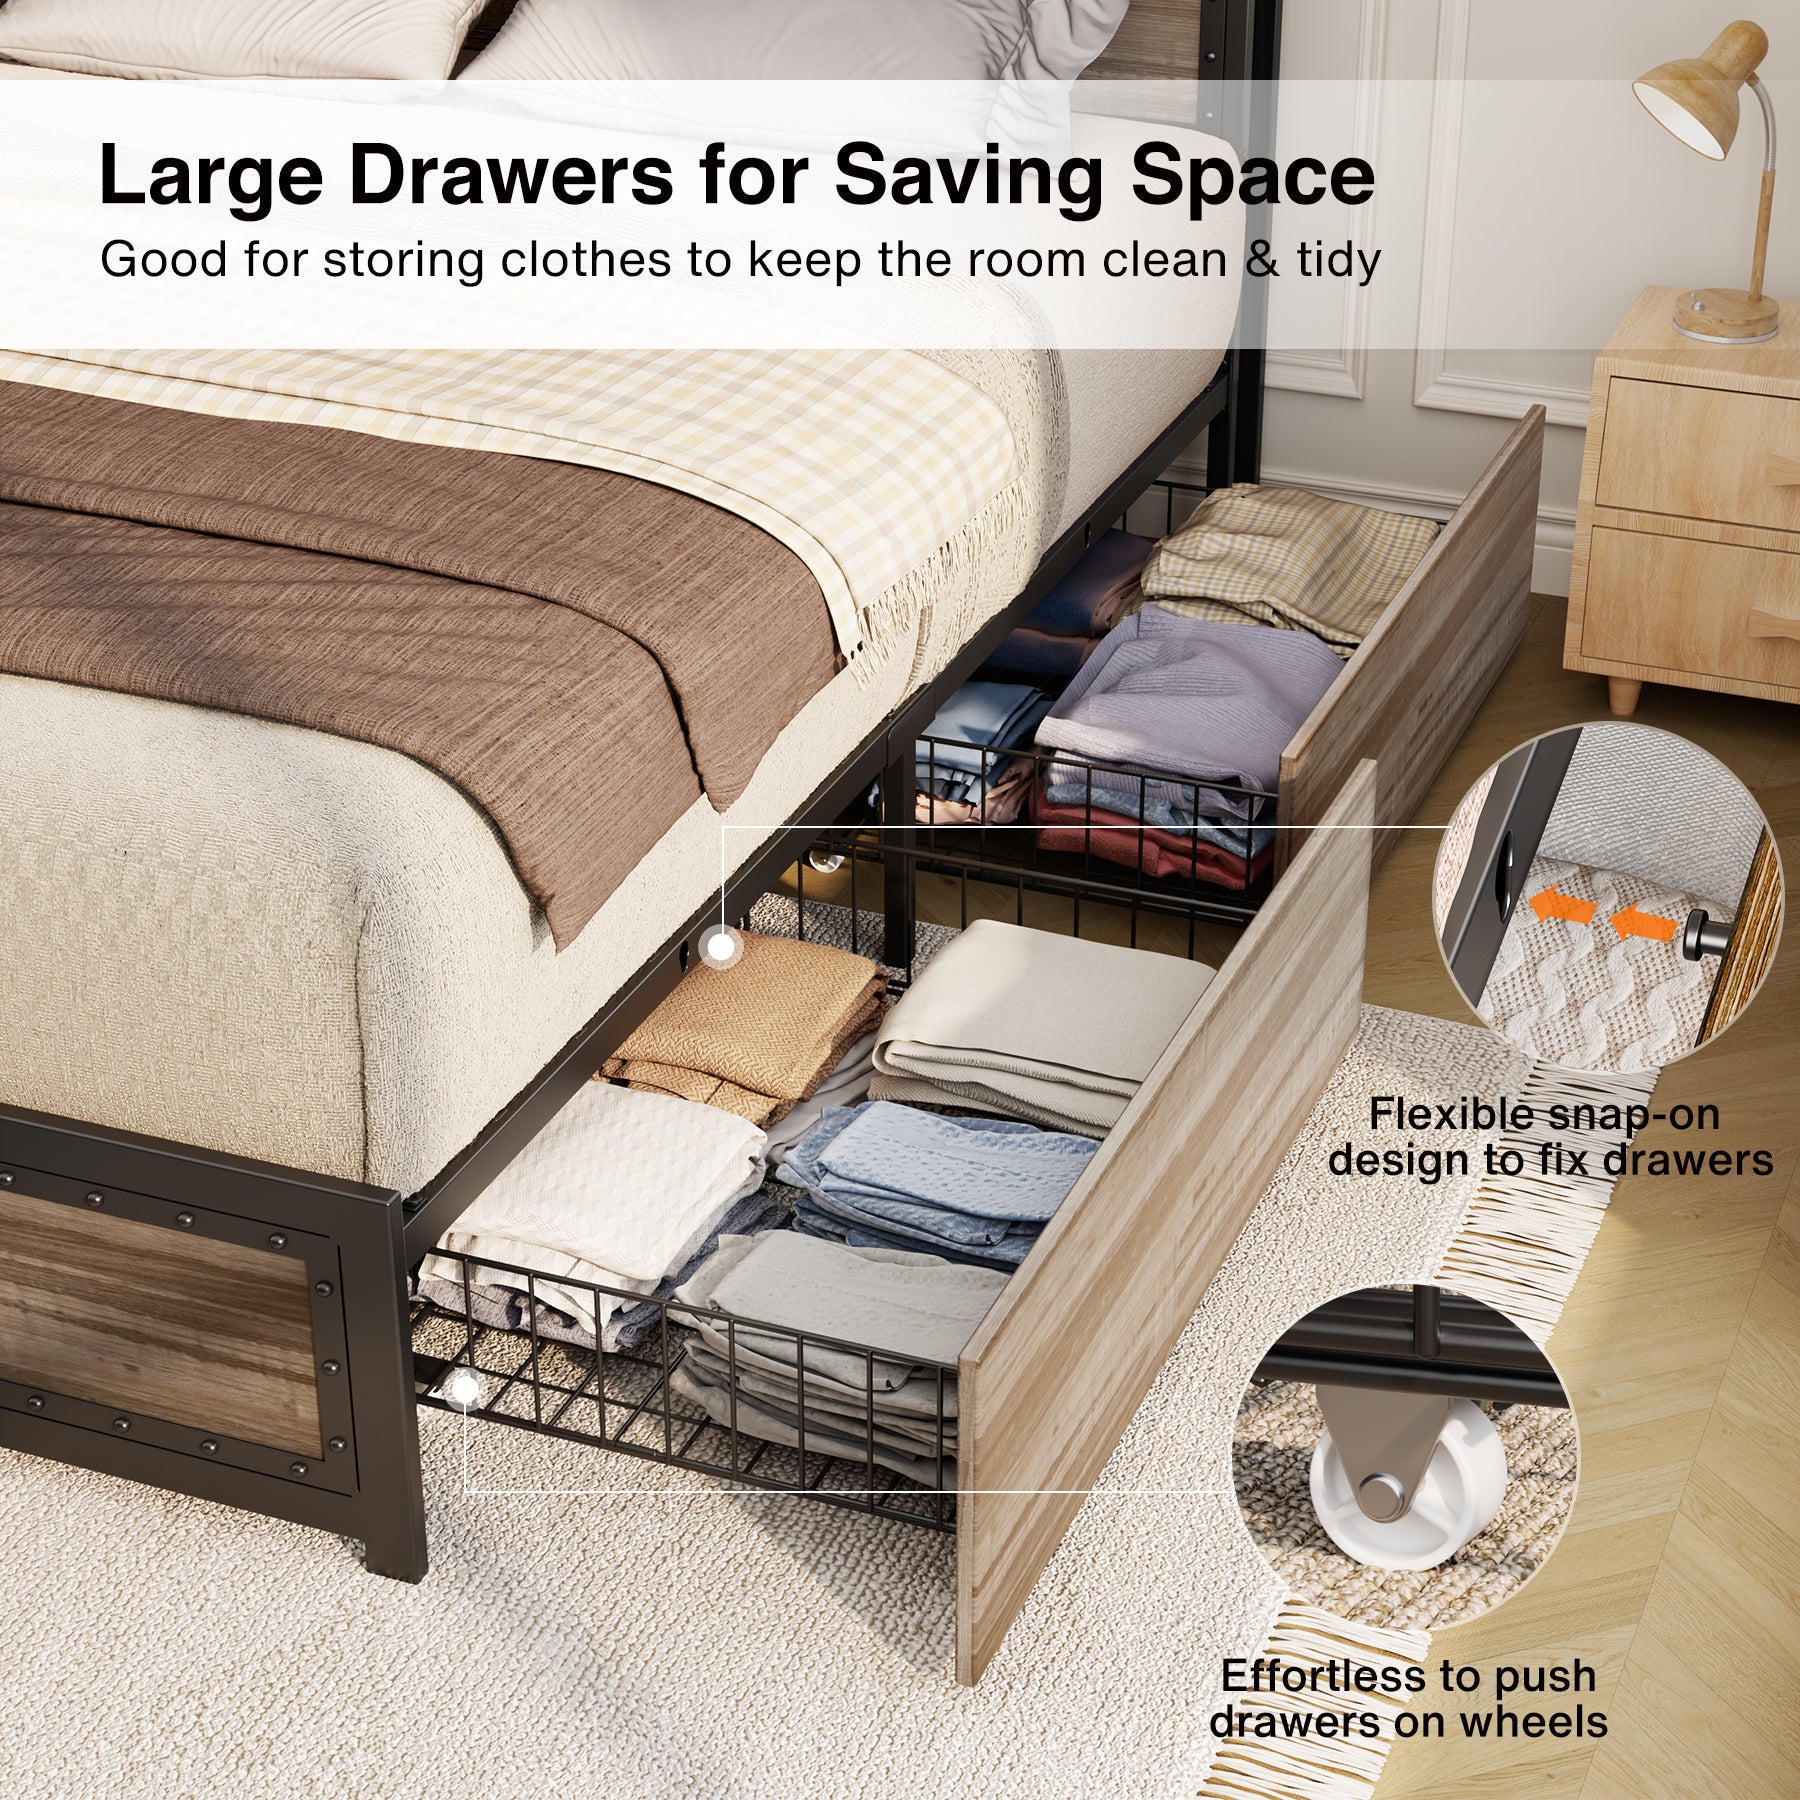 Gizoon BF72 Bed Frame with 4 Storage Drawers and 2-Tier Headboard